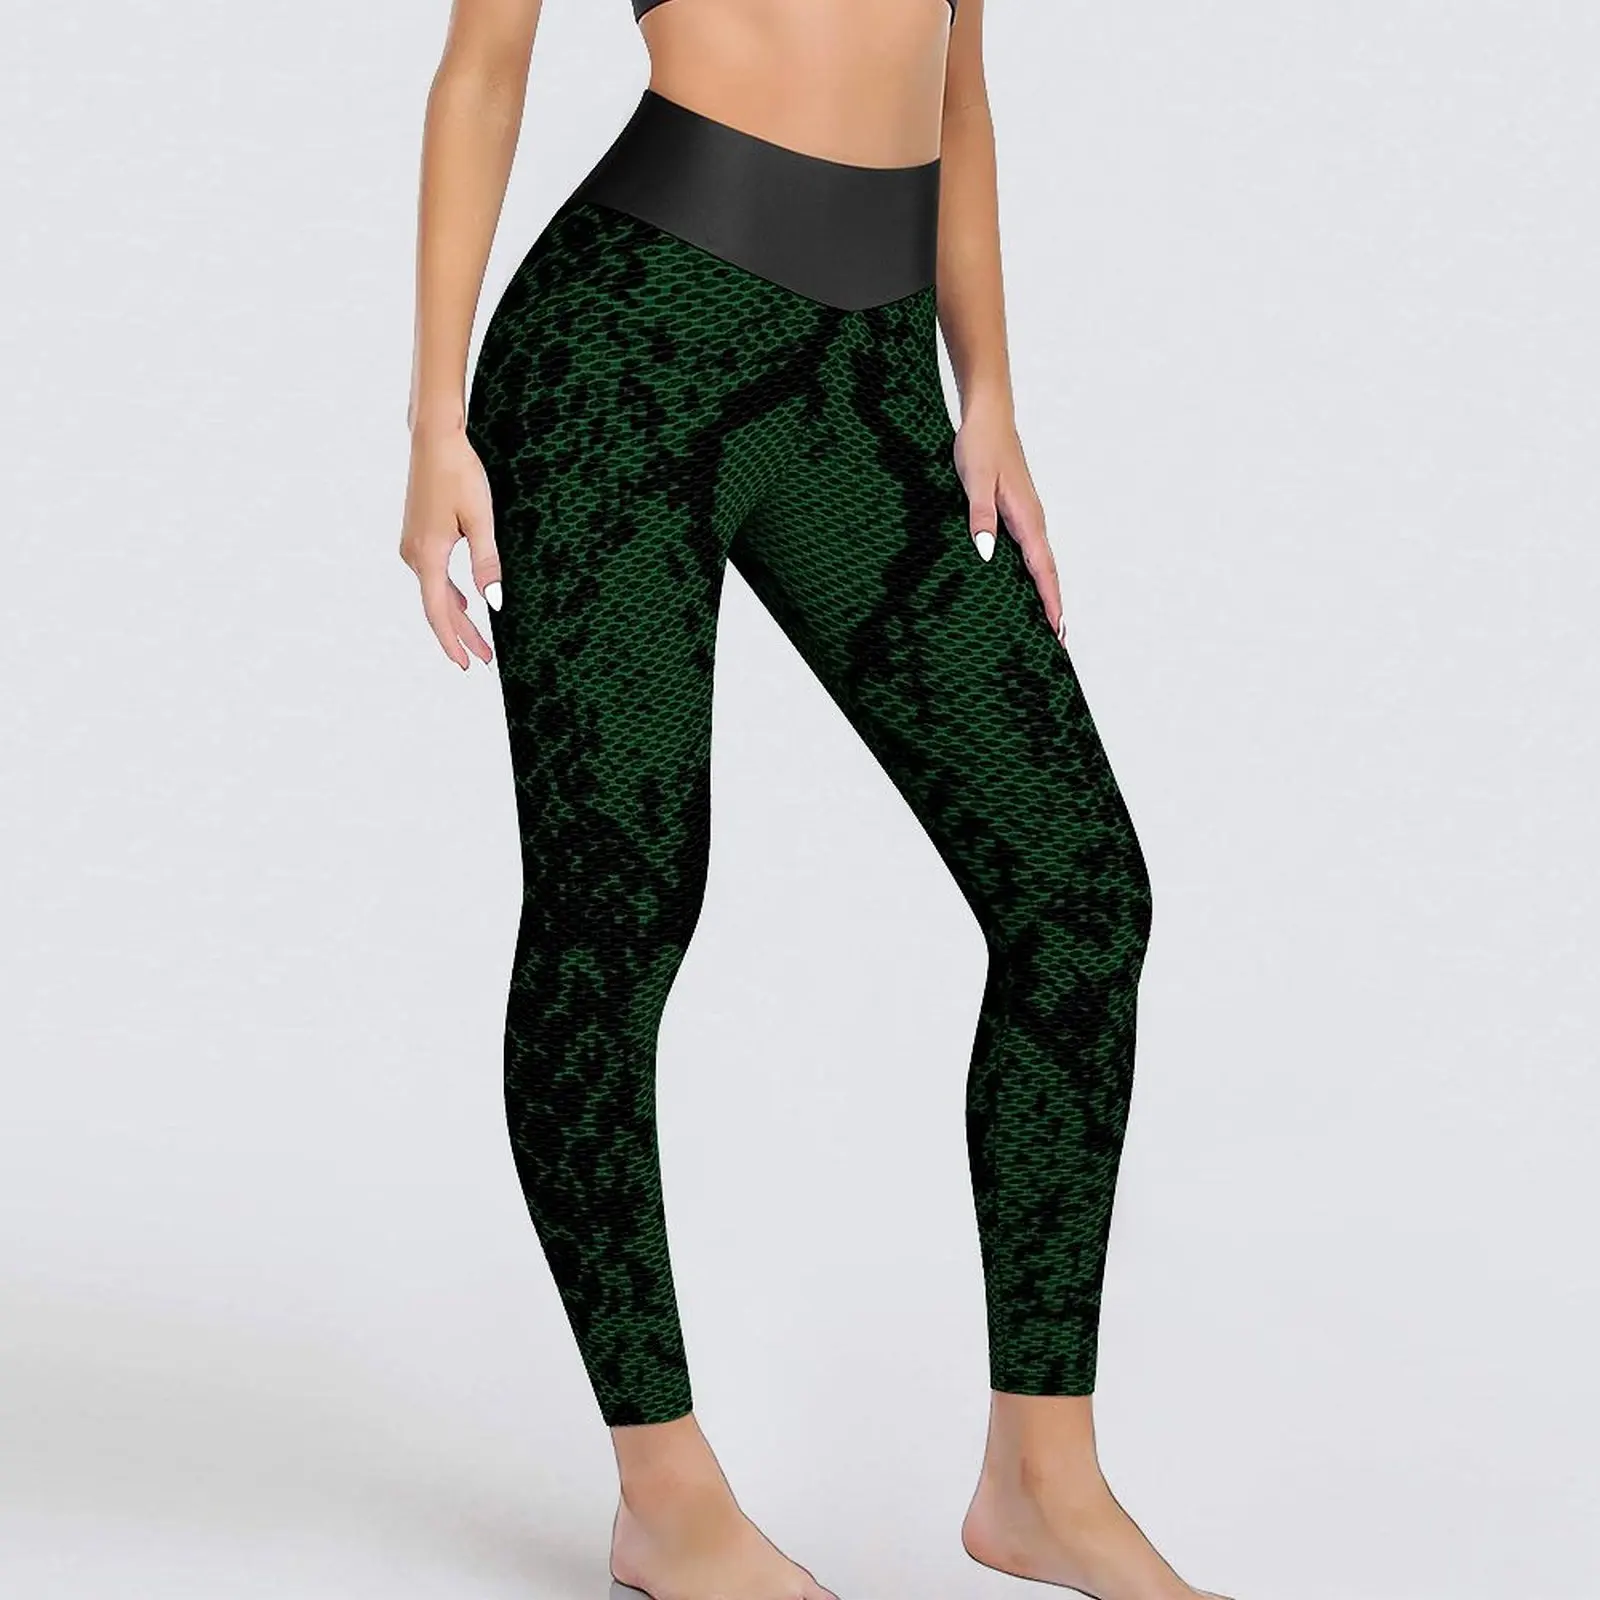 

Green Snakeskin Leggings Sexy Animal Skin Print High Waist Yoga Pants Sweet Stretchy Leggins Lady Graphic Work Out Sports Tights